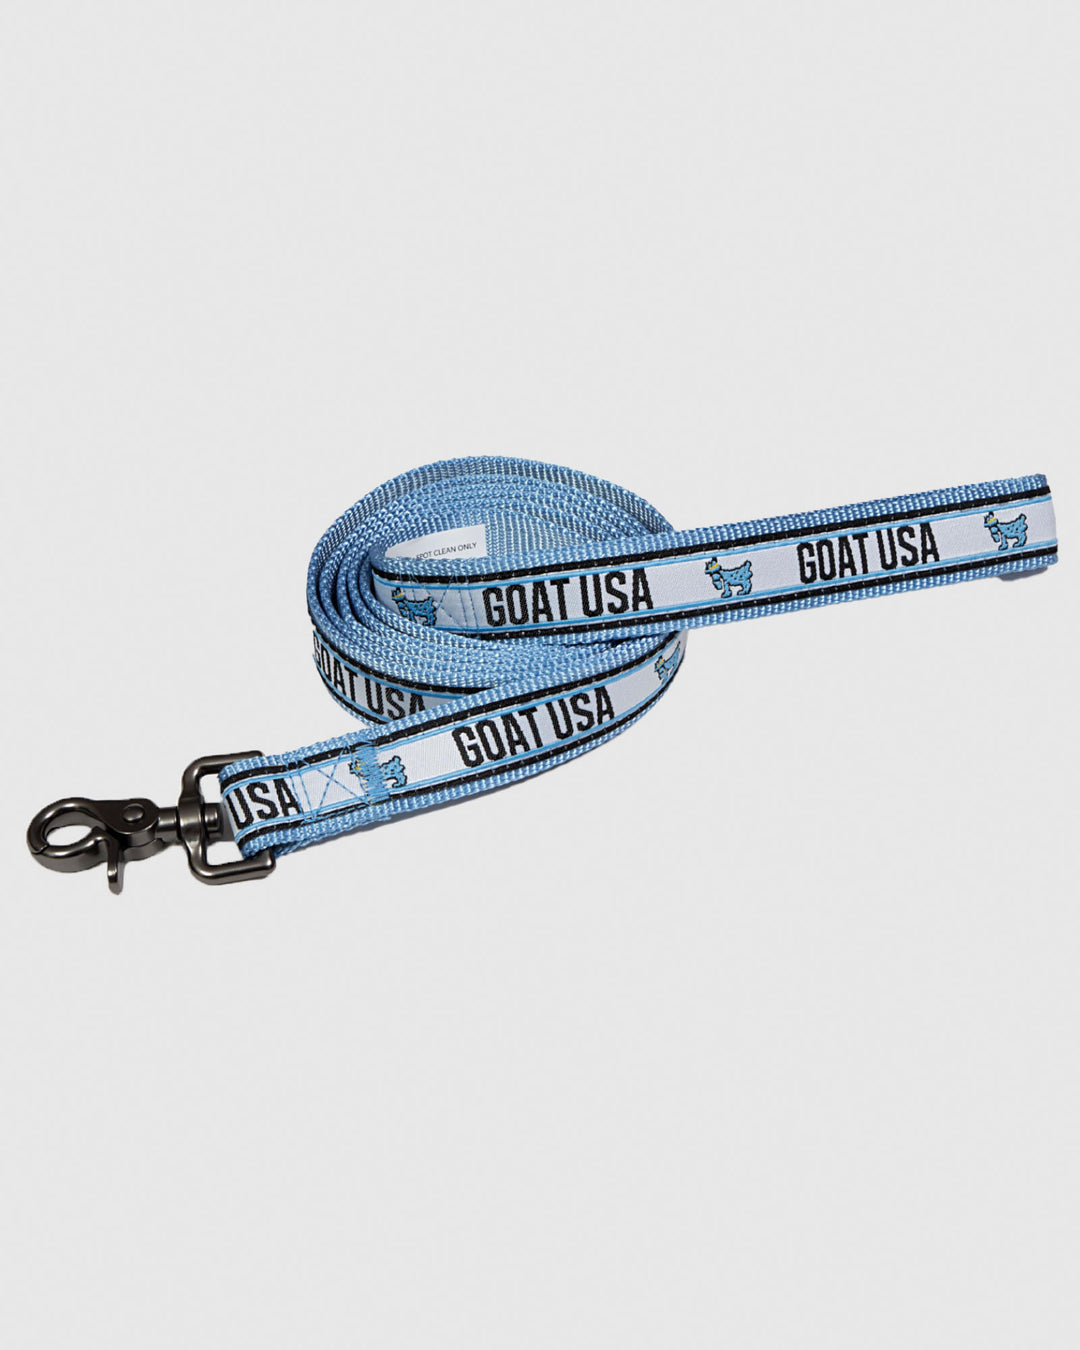 Blue and white dog leash rolled up